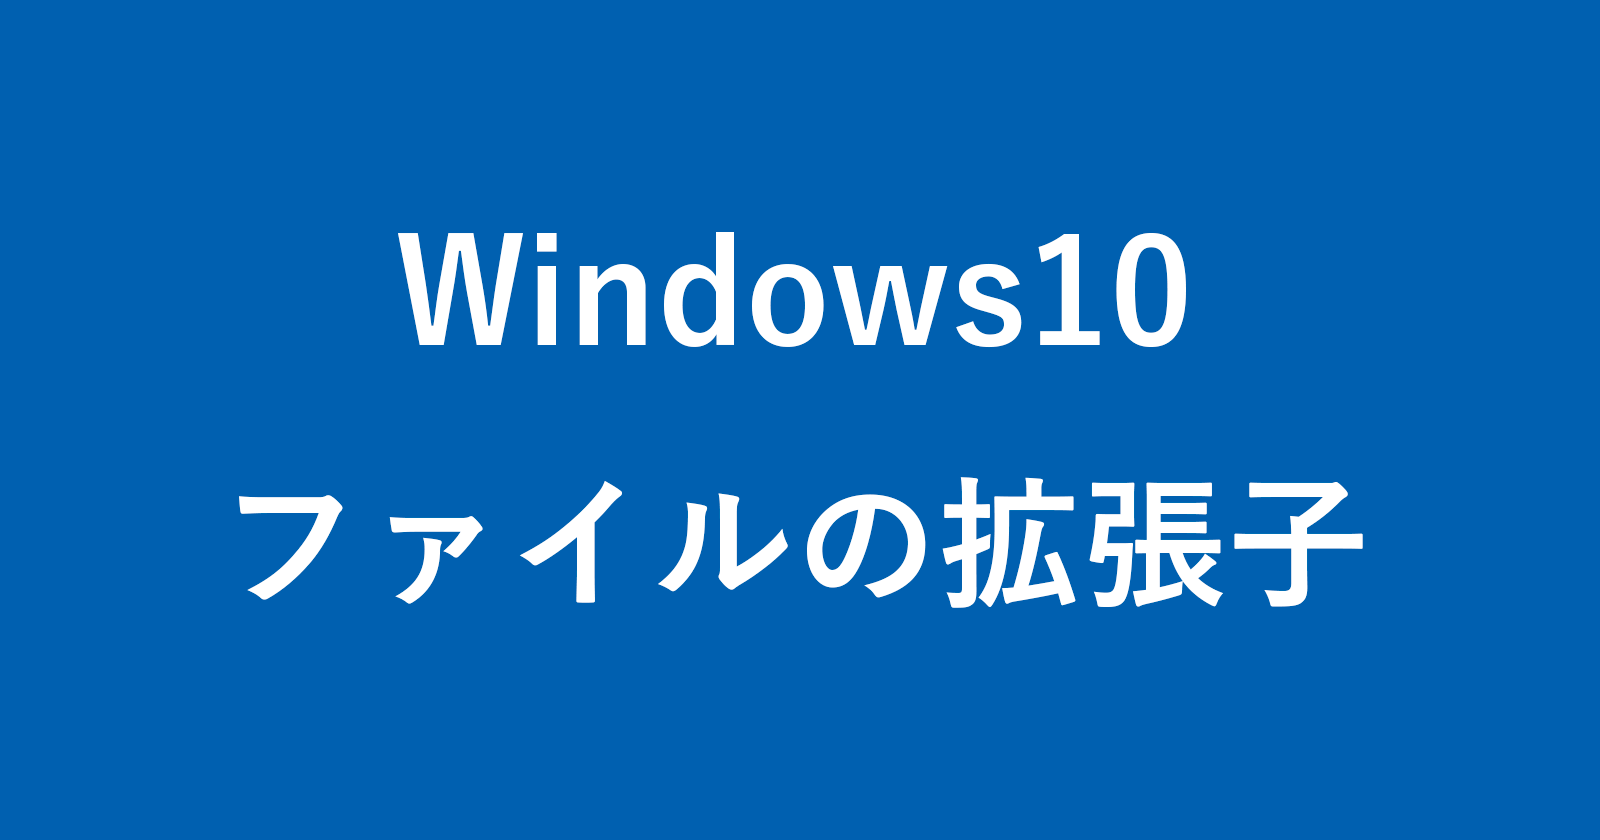 windows 10 file extensions